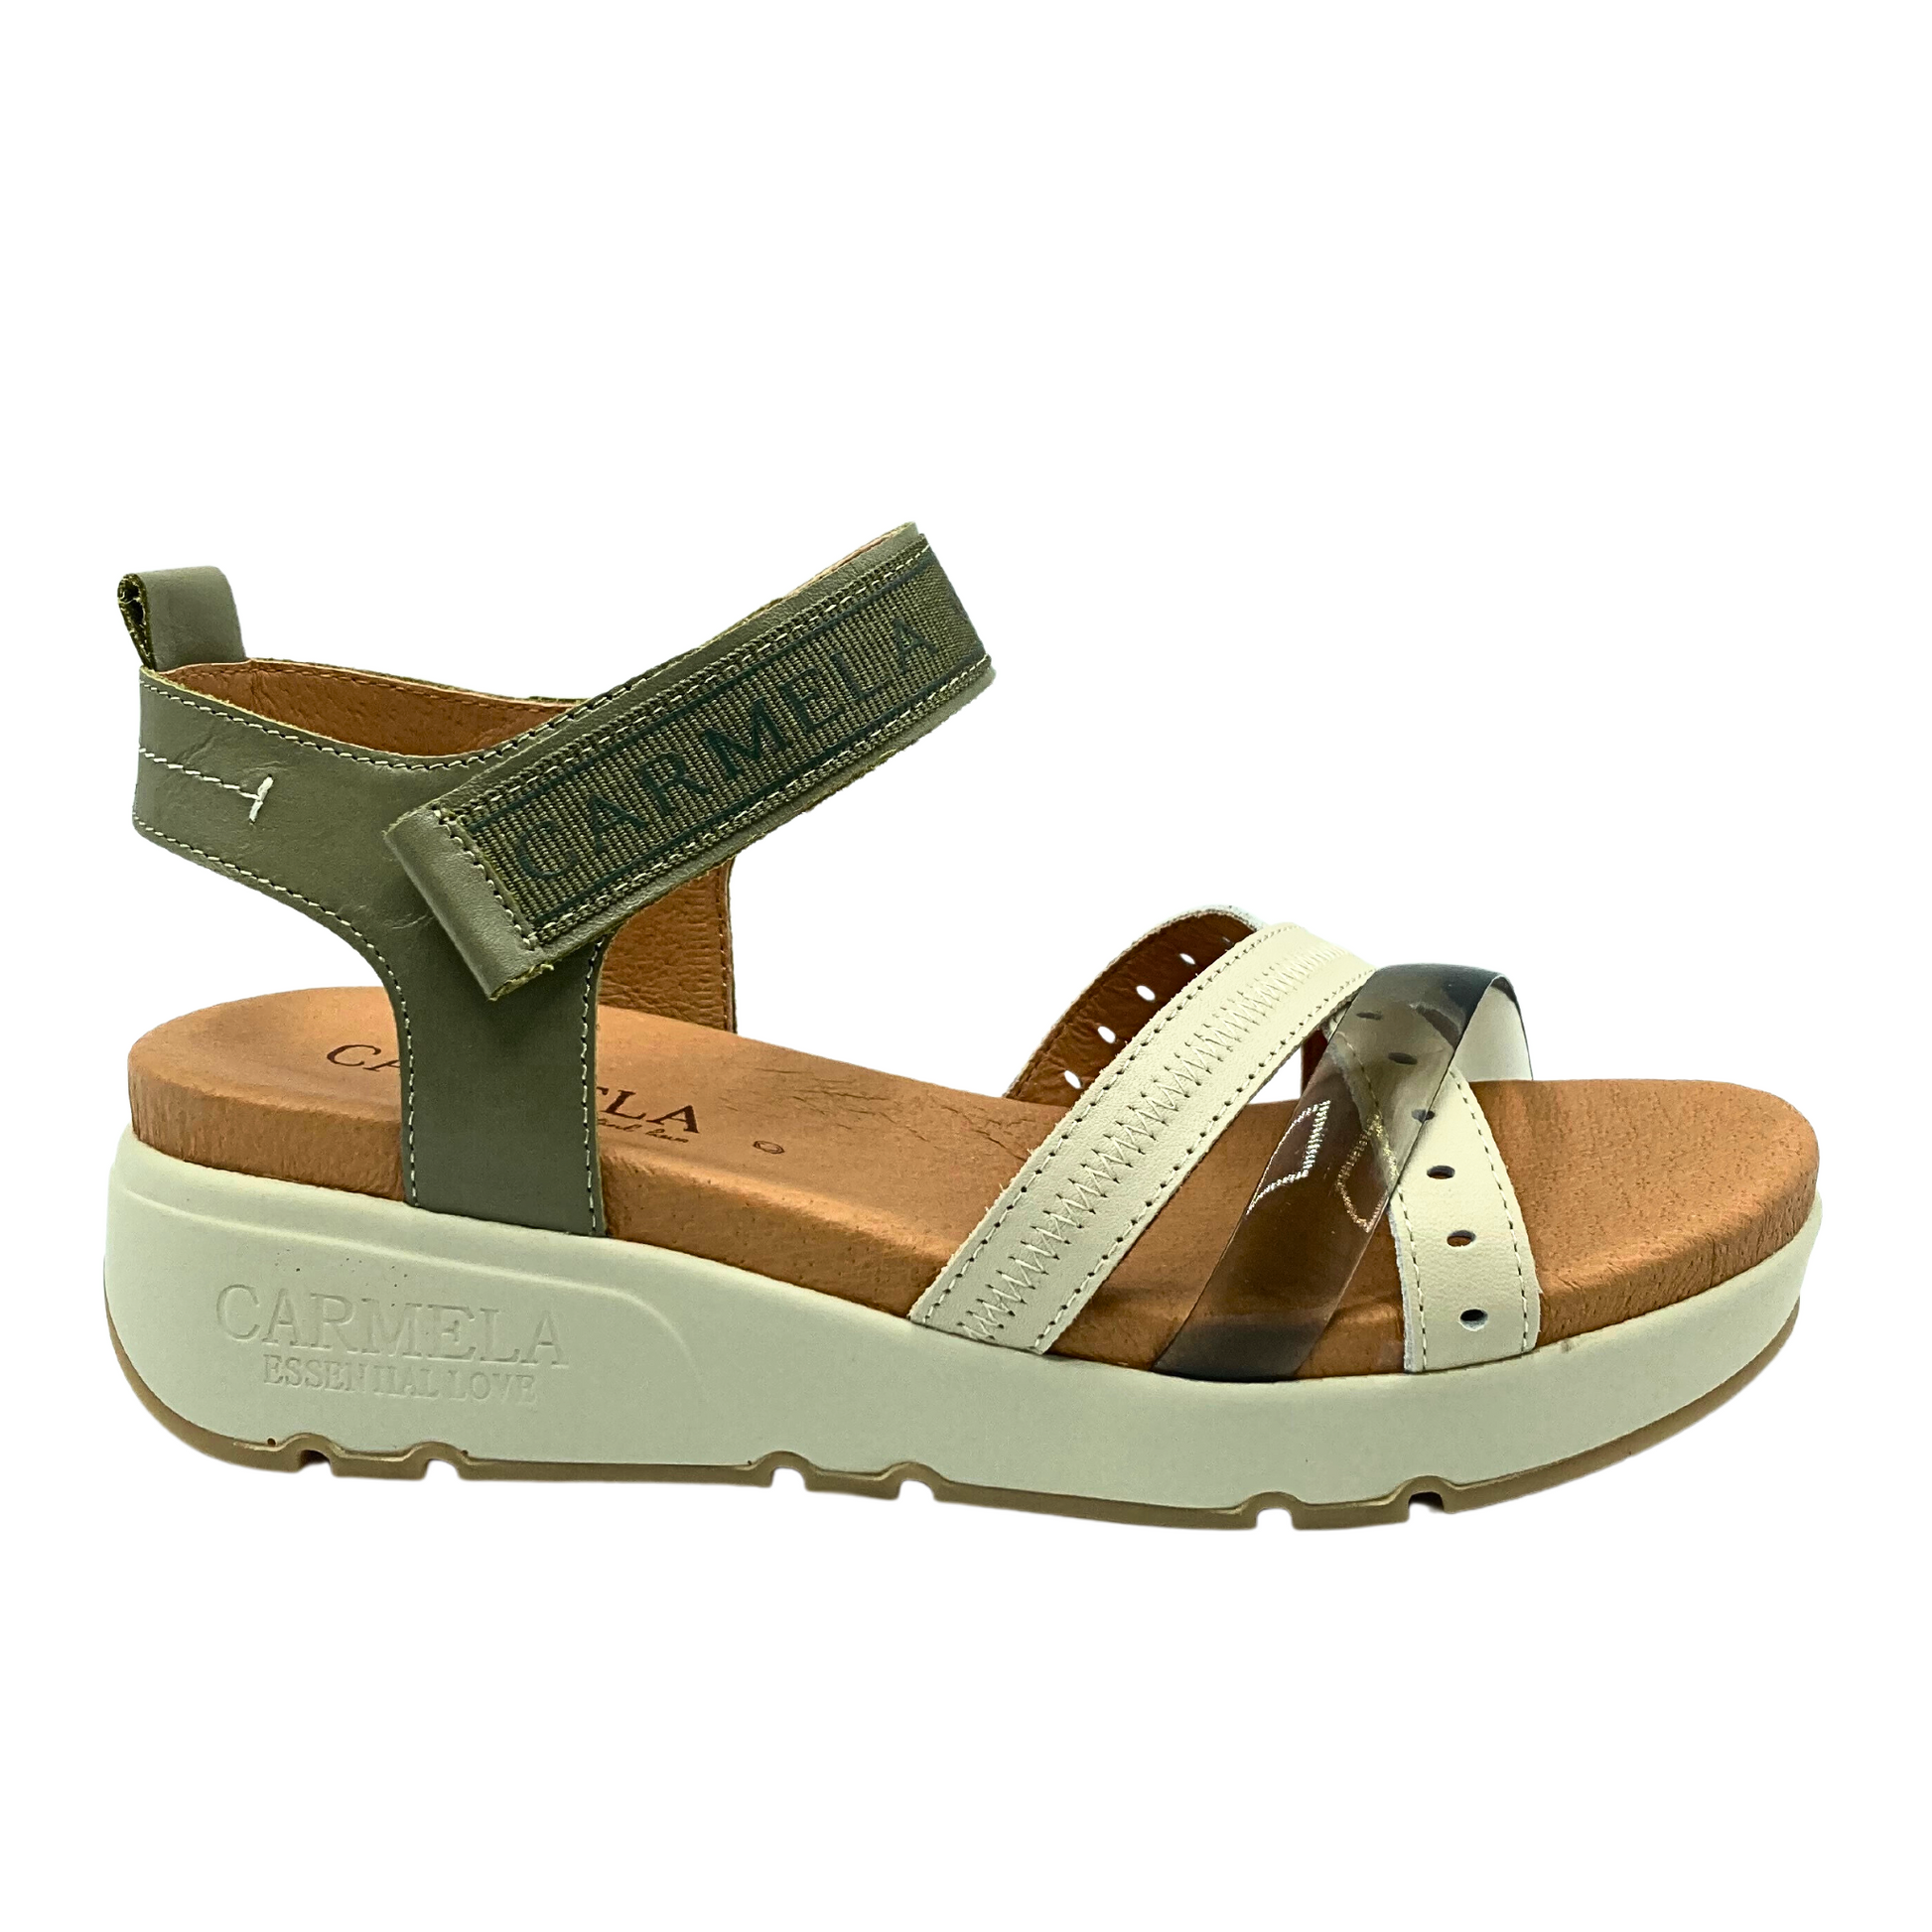 Outside view of wedge sandal by Carmela.  Combination of cream and khaki colors.  Open toe and heel with back and ankle strap.  Ankle strap has velcro adjustment